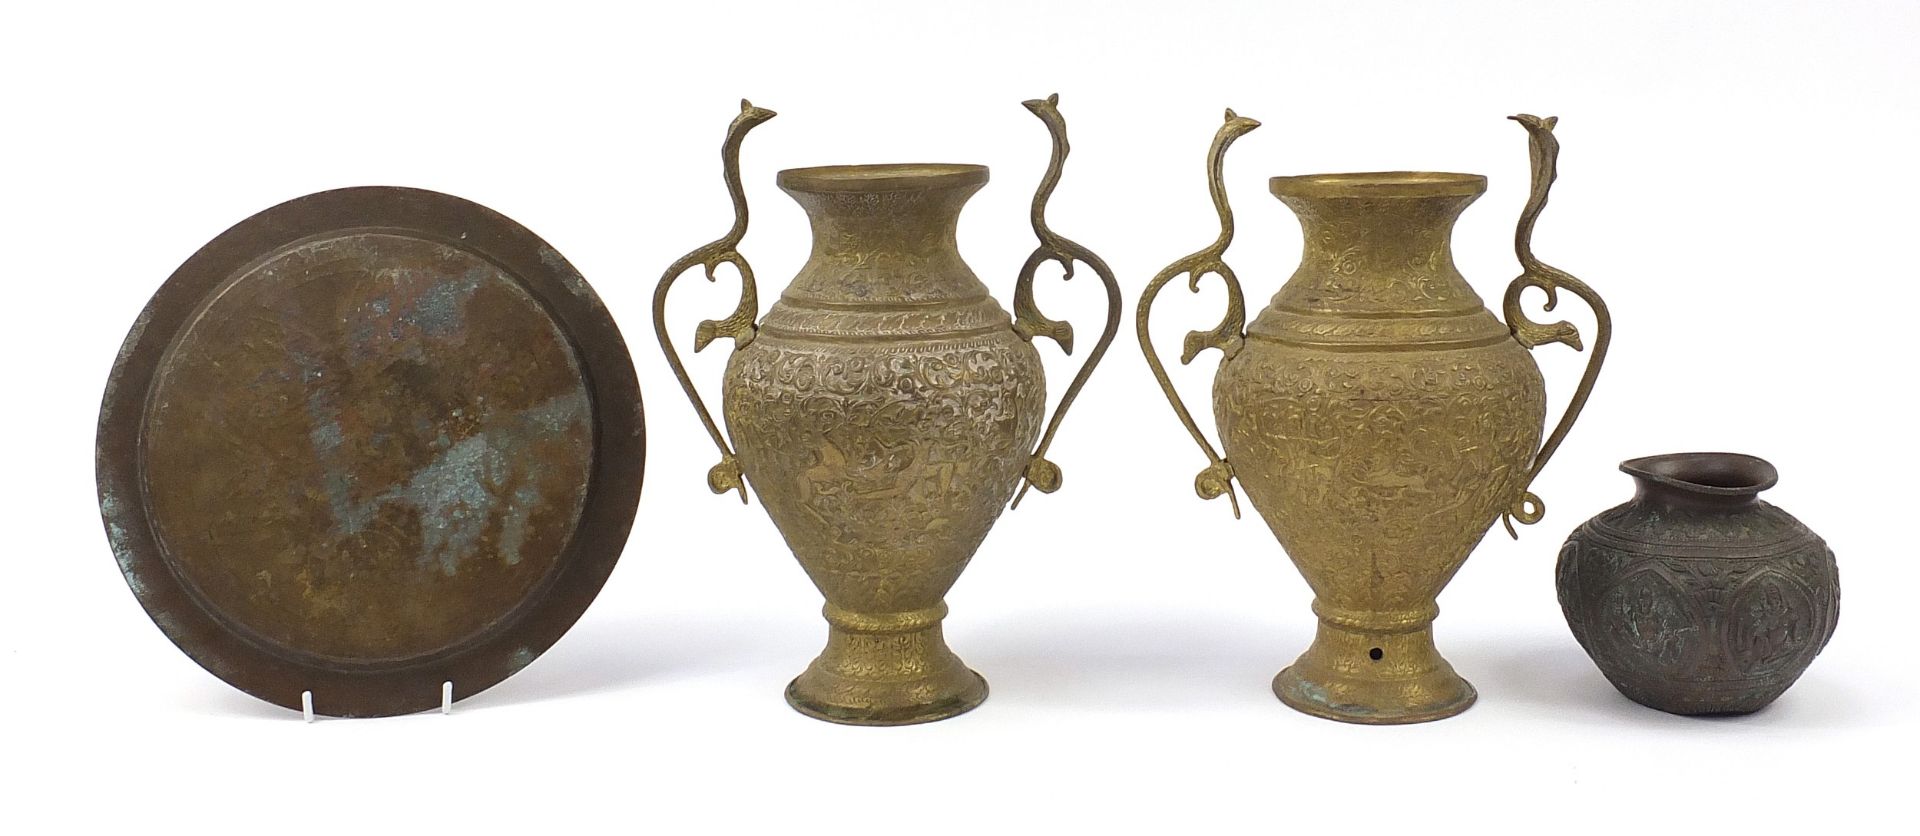 Indian and Middle Eastern metalware including a pair of vases with serpent handles decorated with - Image 6 of 7